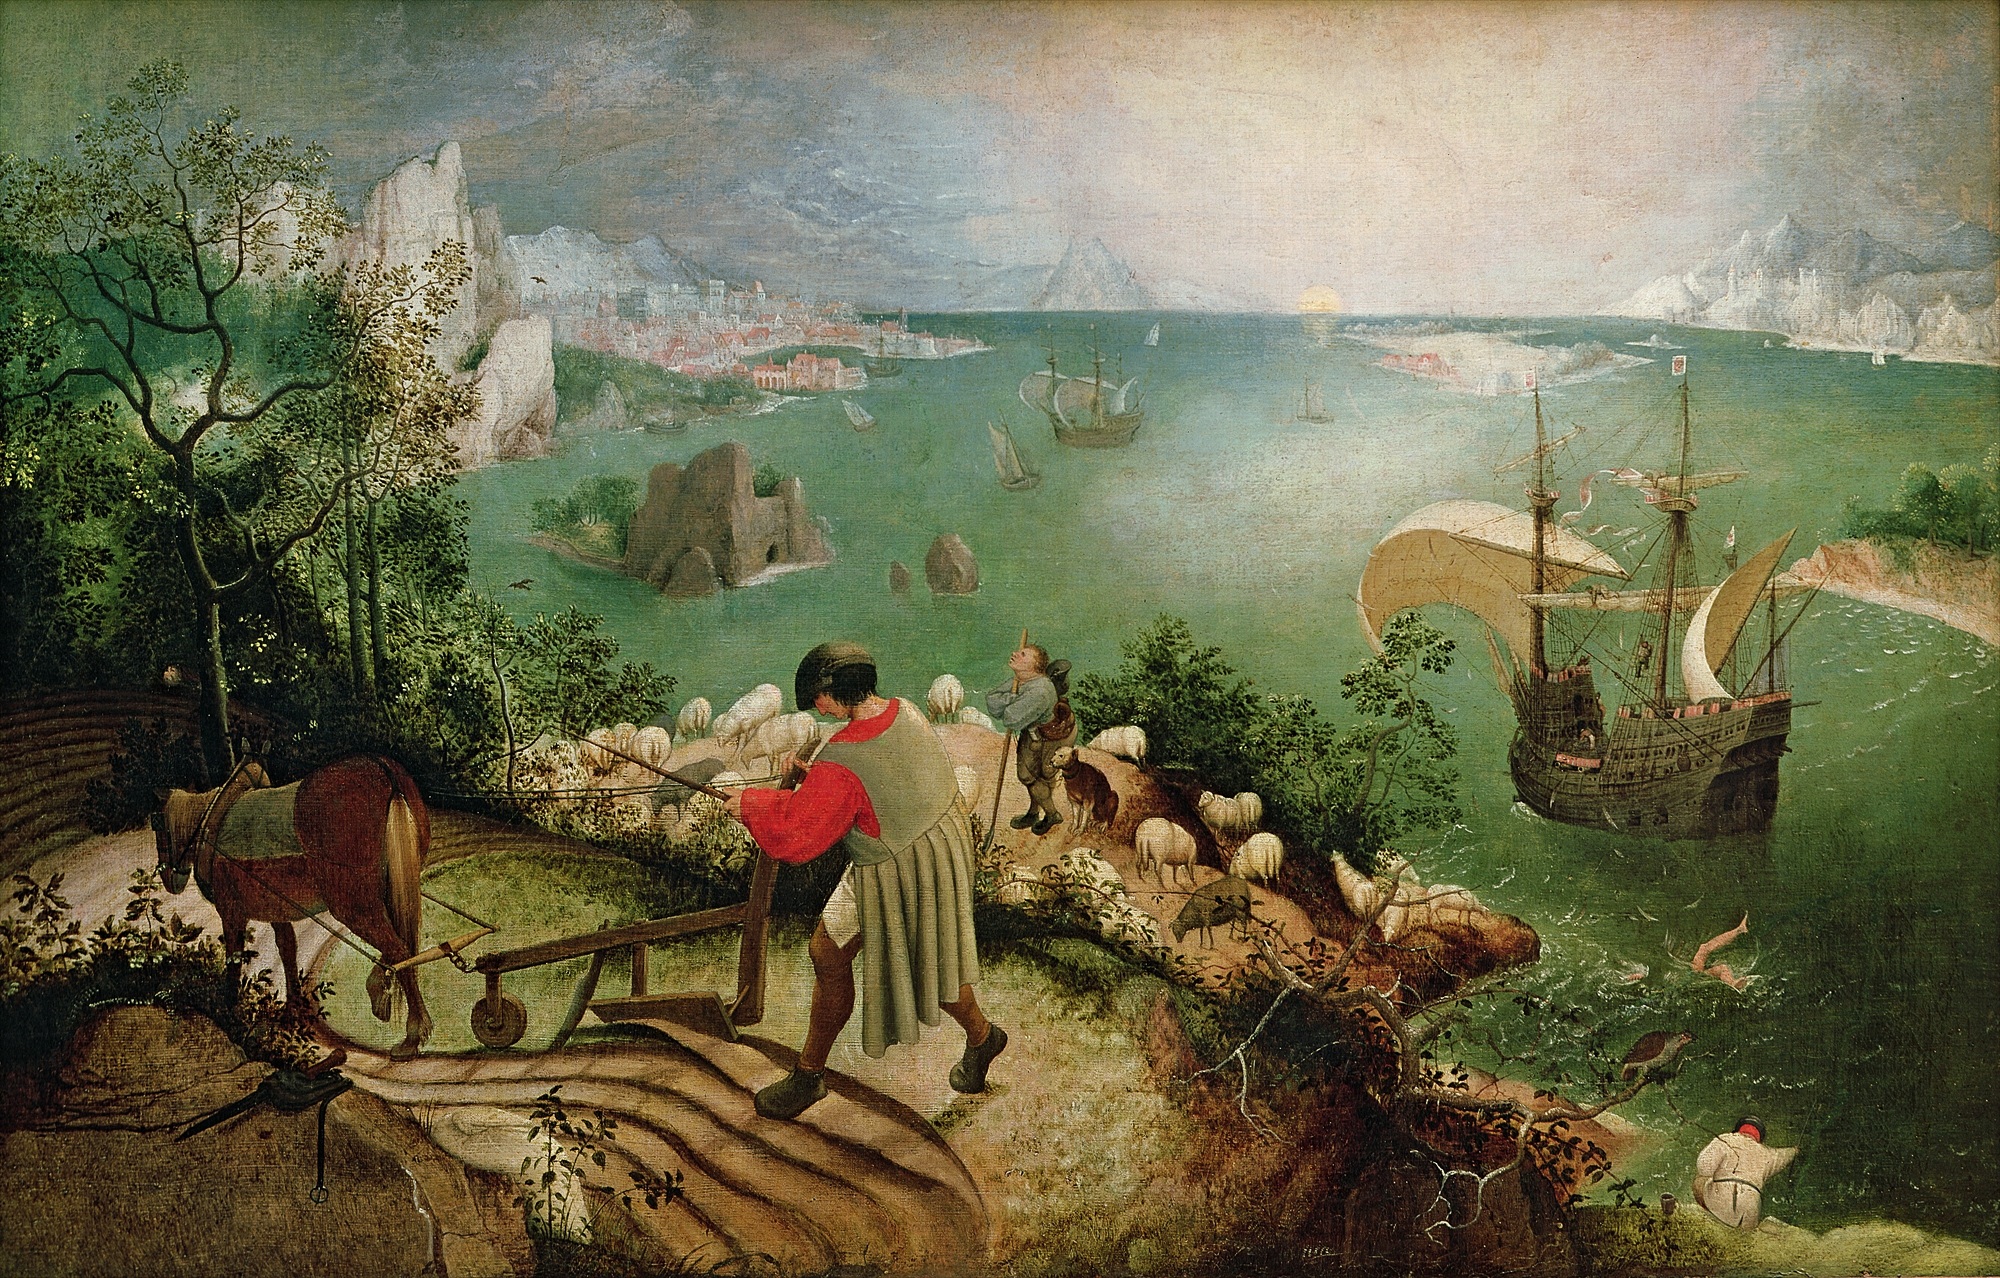 Landscape with the Fall of Icarus - Pieter Bruegel the Elder